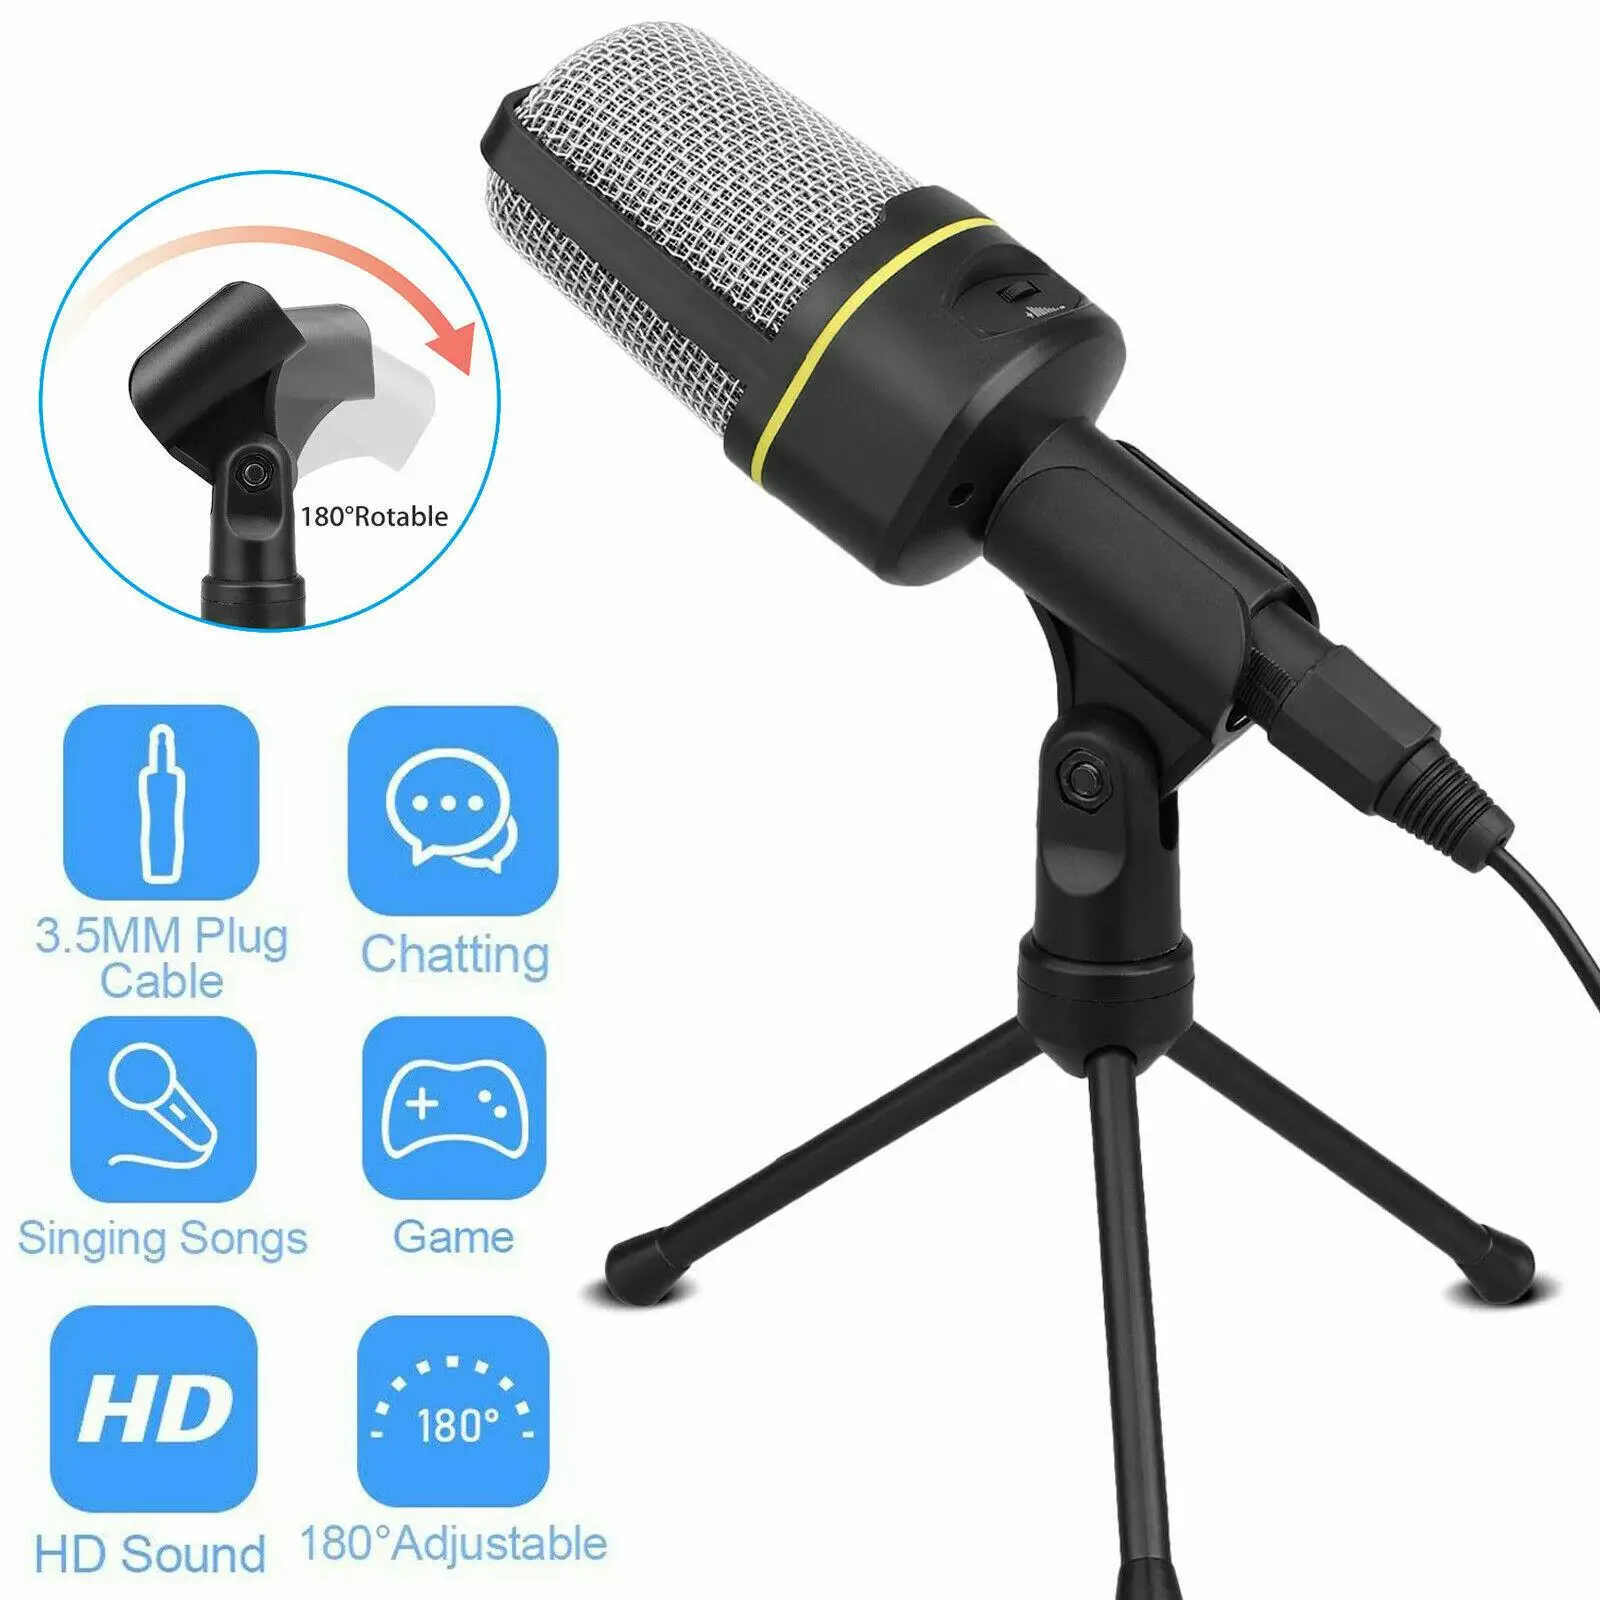 

Condenser Microphone 3.5mm Plug Home Stereo MIC Desktop Tripod for PC YouTube Video Skype Chatting Gaming Podcast Recording